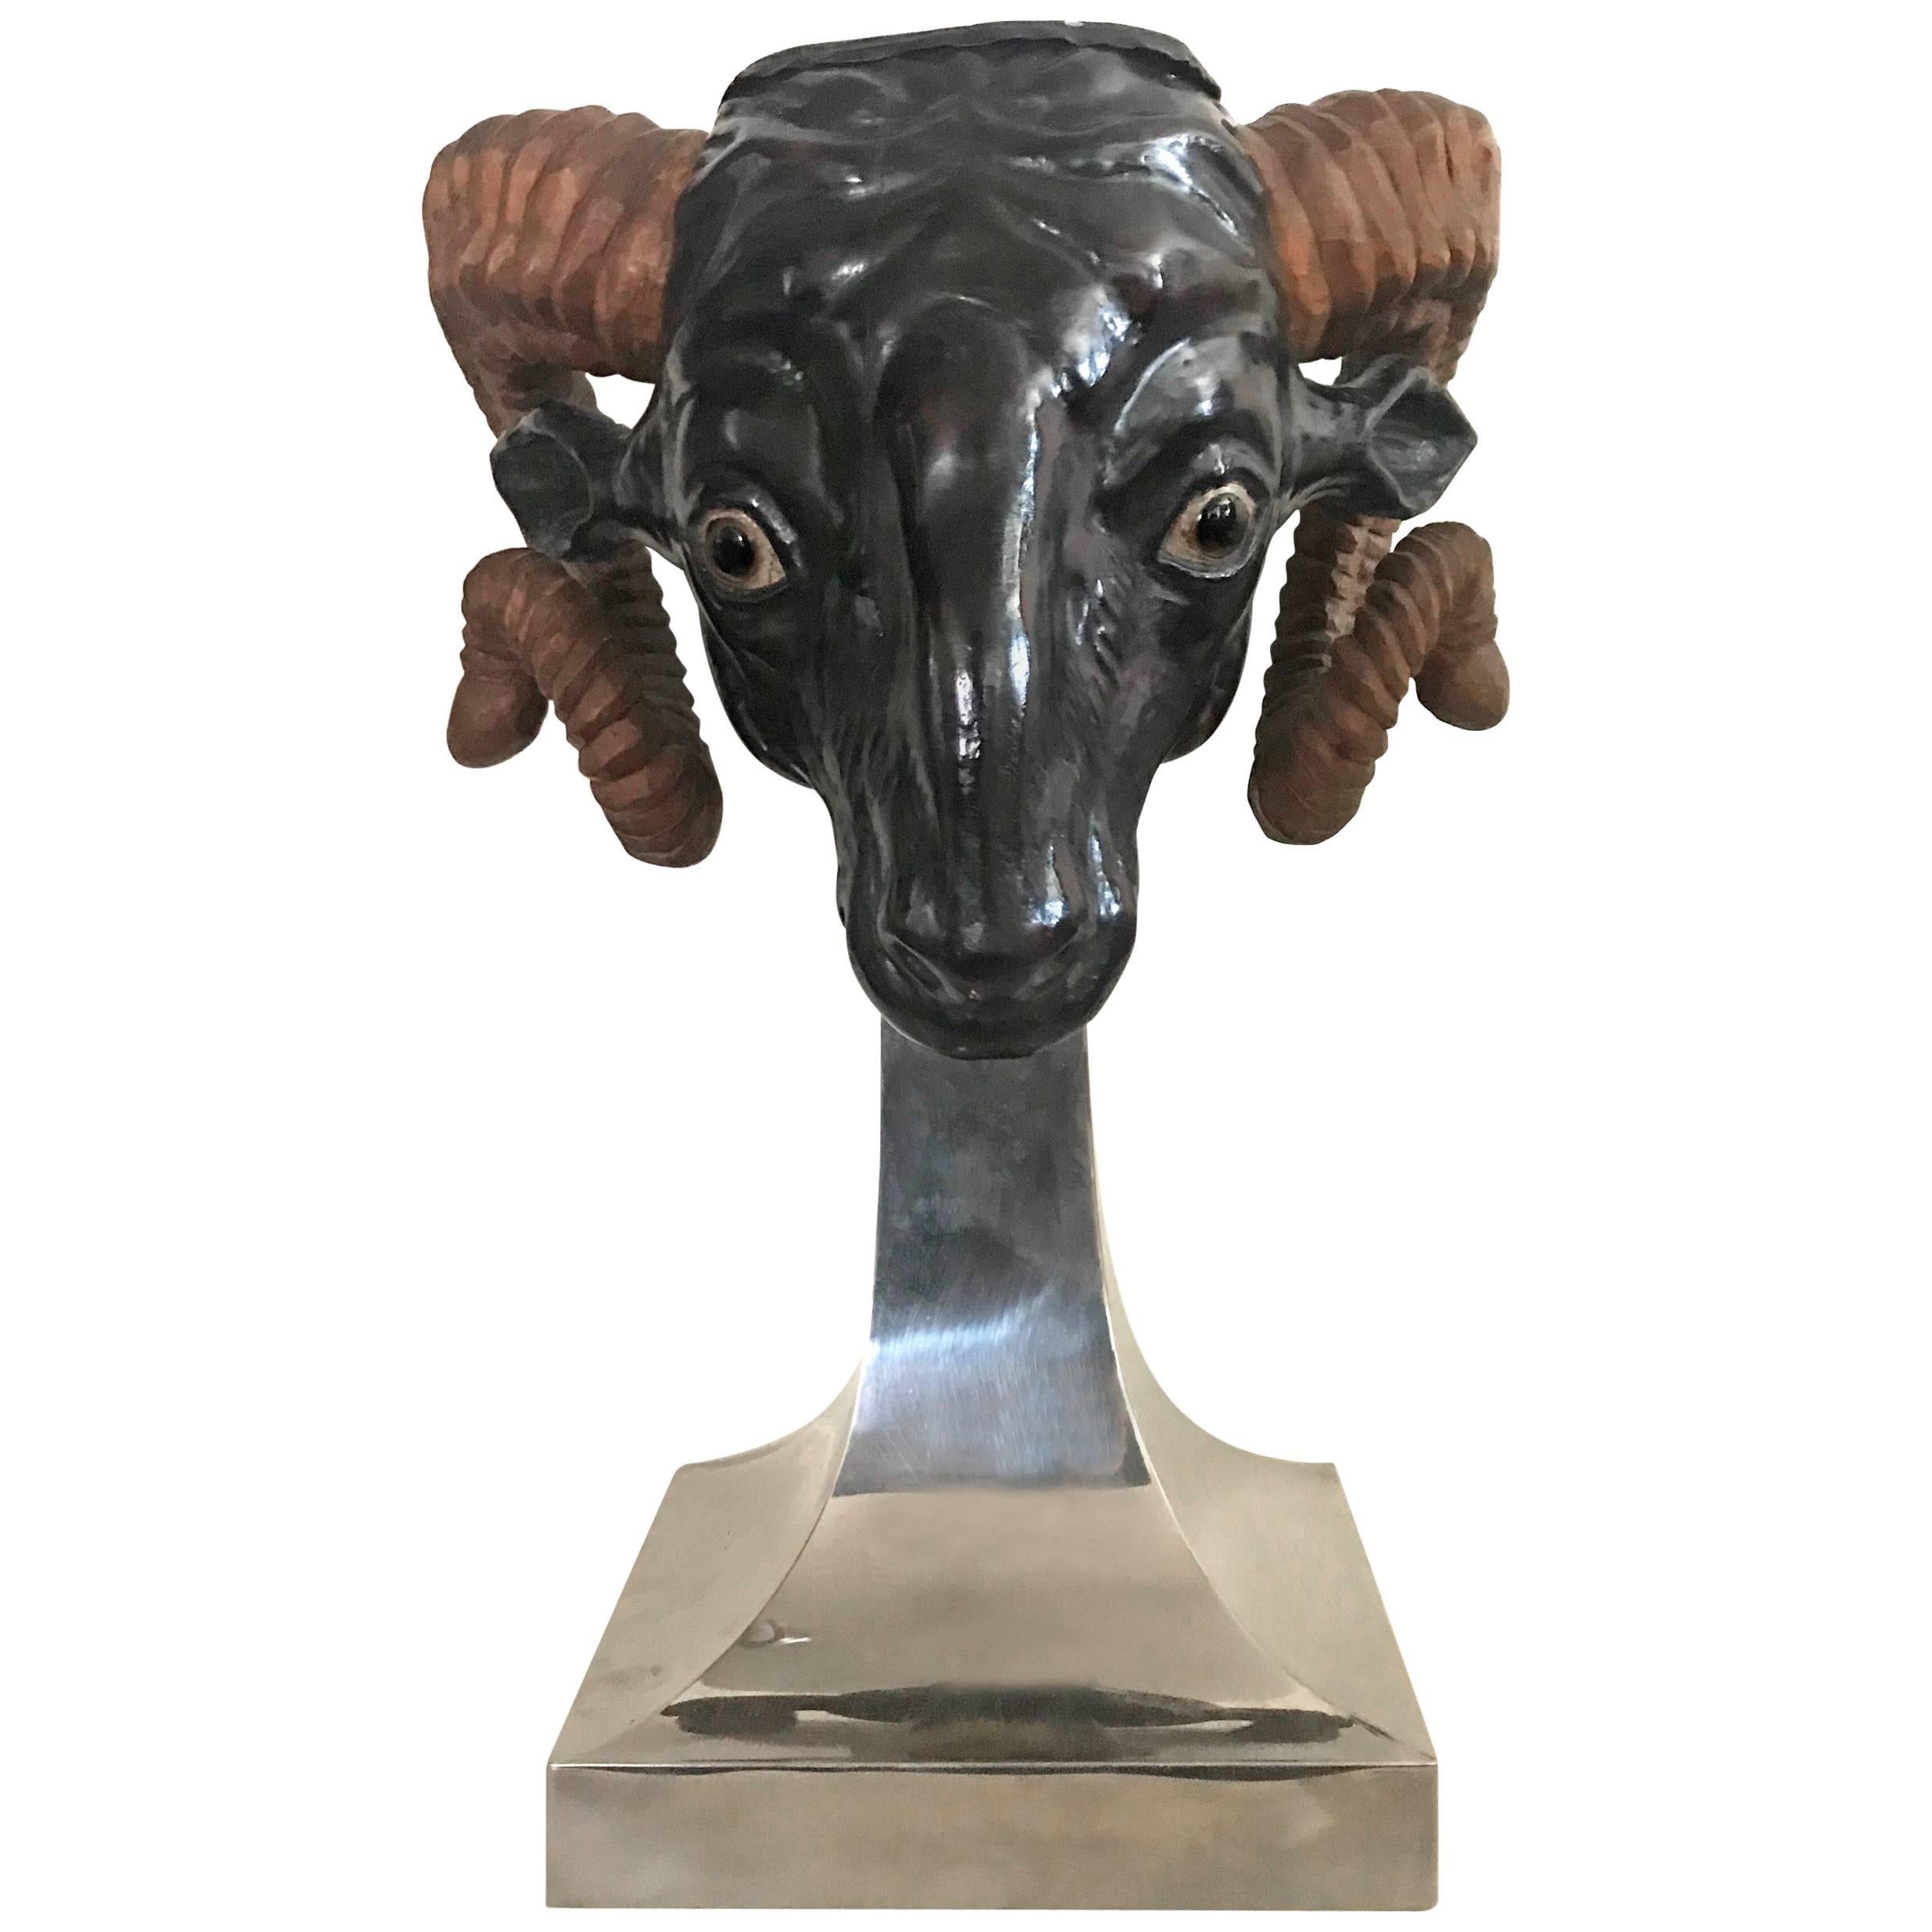 Rare 1970s Anthony Redmile Carved Ram’s Head Planter on Chrome Stand, England